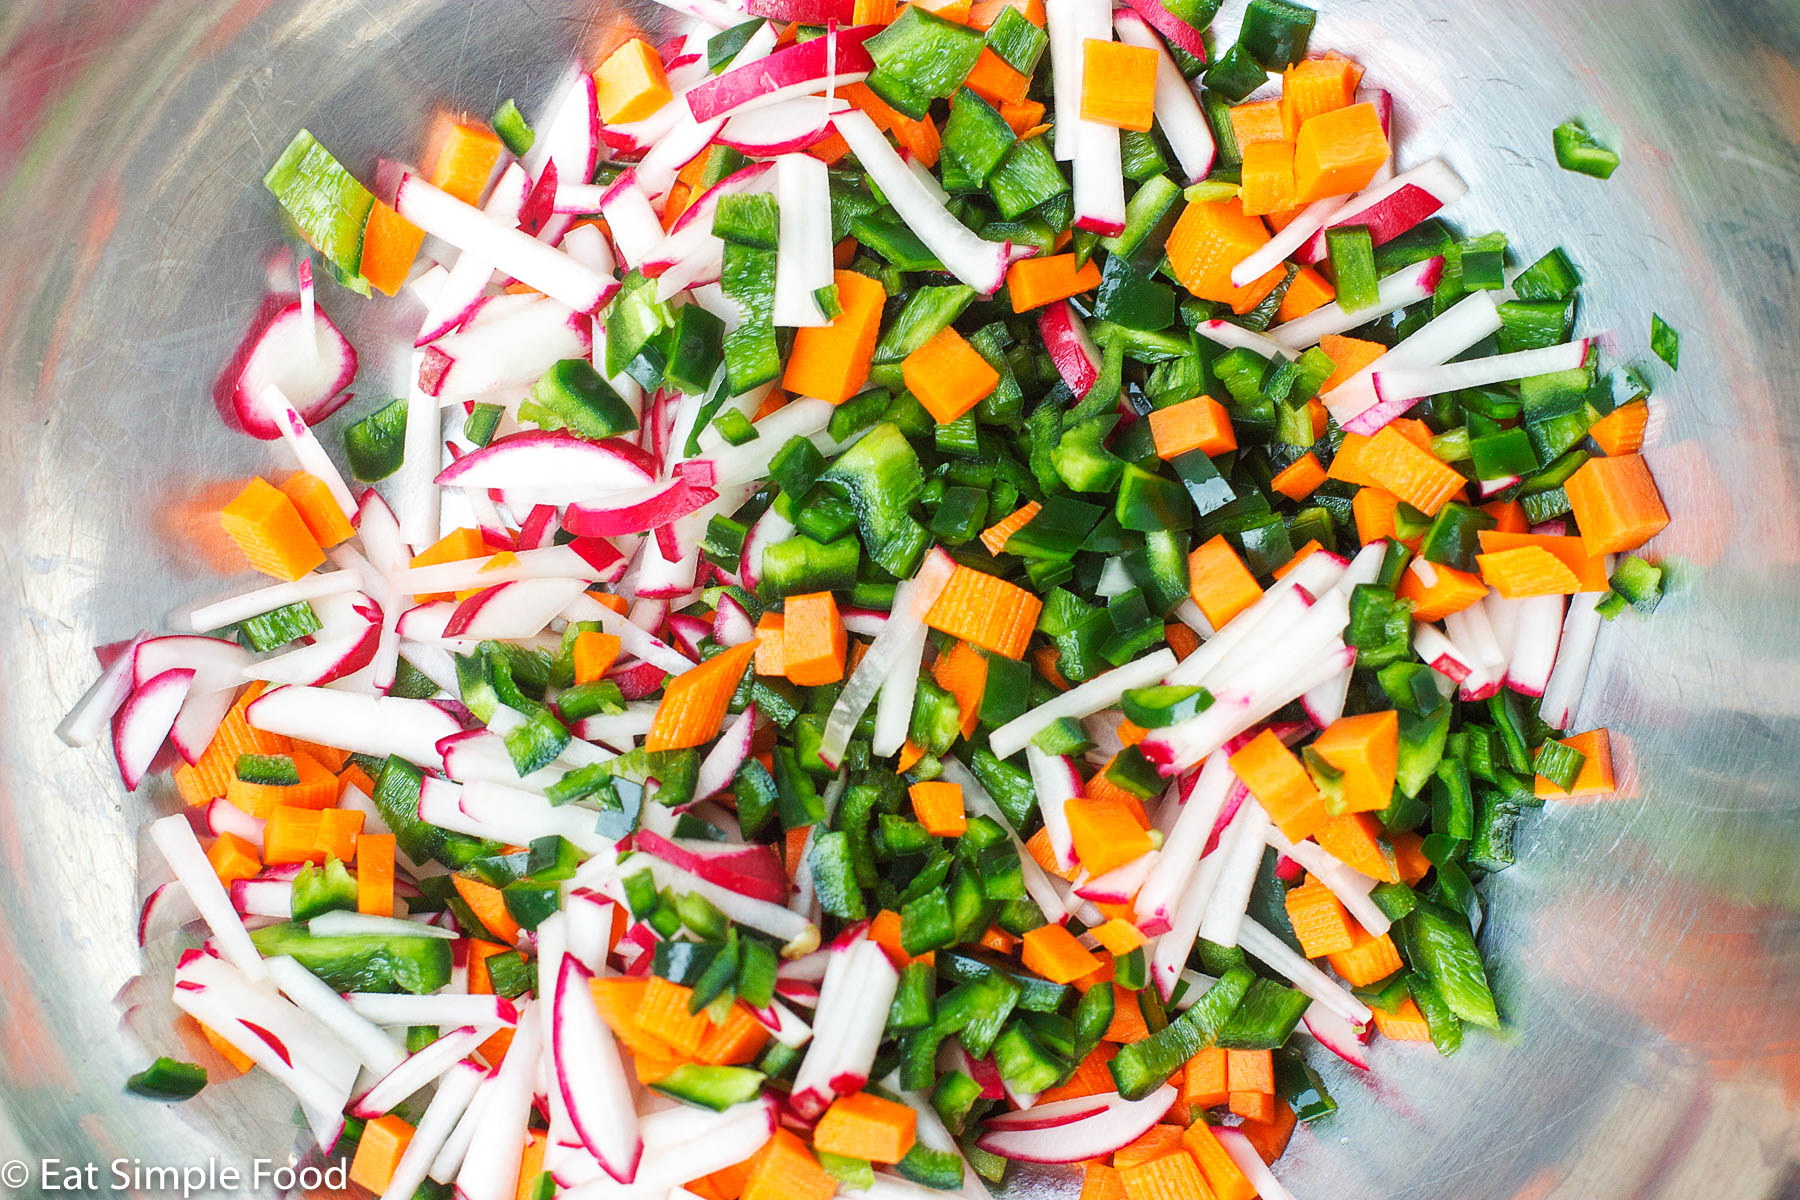 Bowl of chopped vegetables (carrots, radishes, peppers. Top view close up.